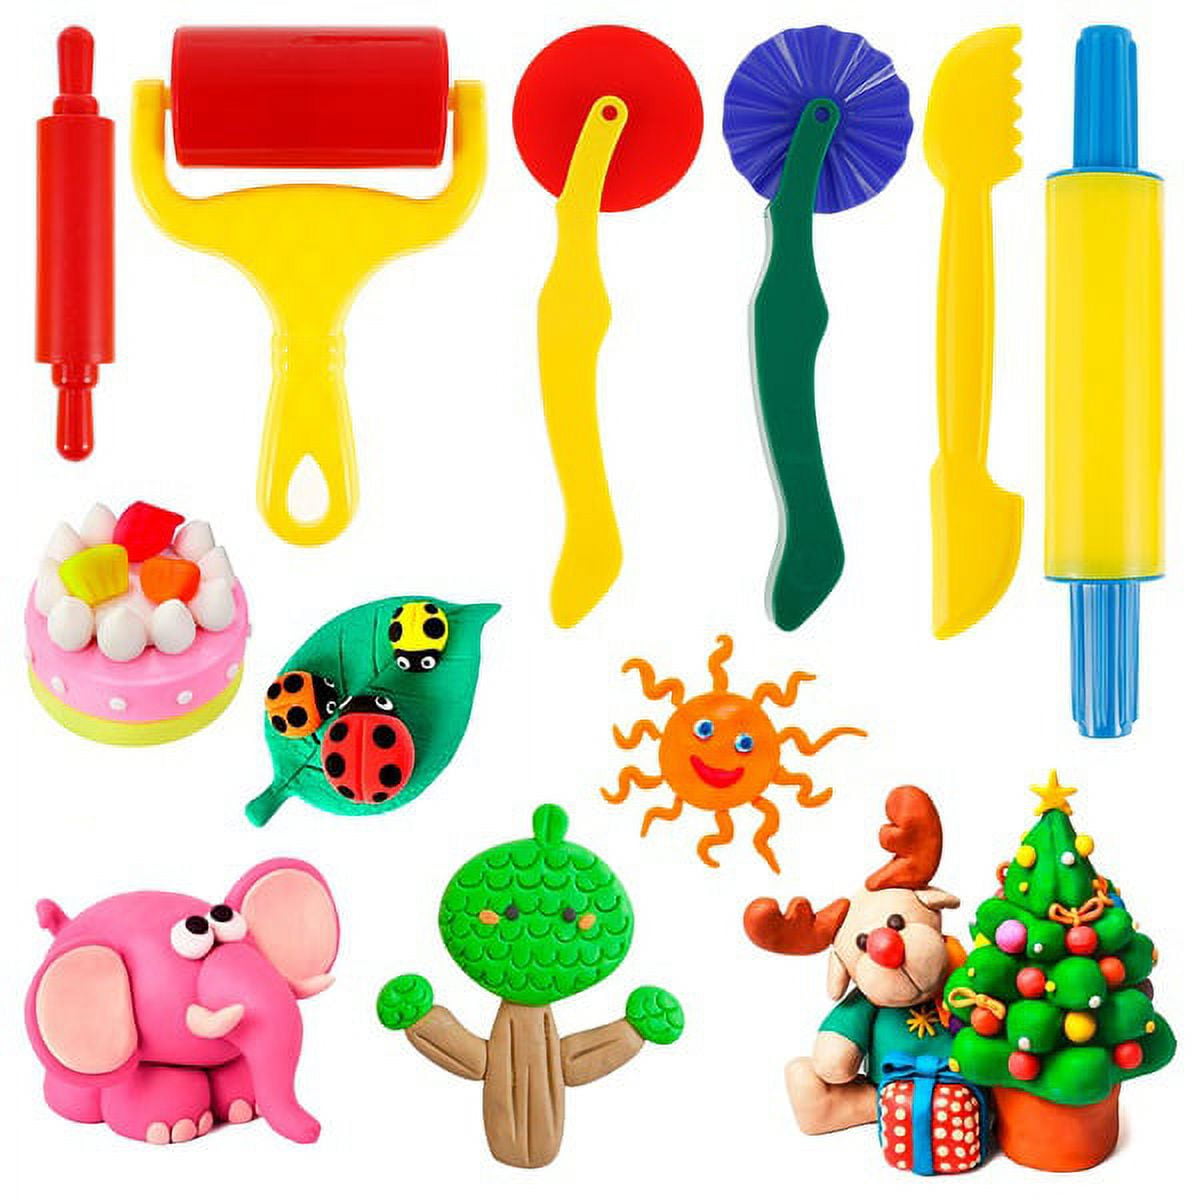 Plasticine Model Playdough Tools Set for Kids 3D Syringe Roller Impression  Moulds Play Dough Tools Kit Clay Craft Toys Gift